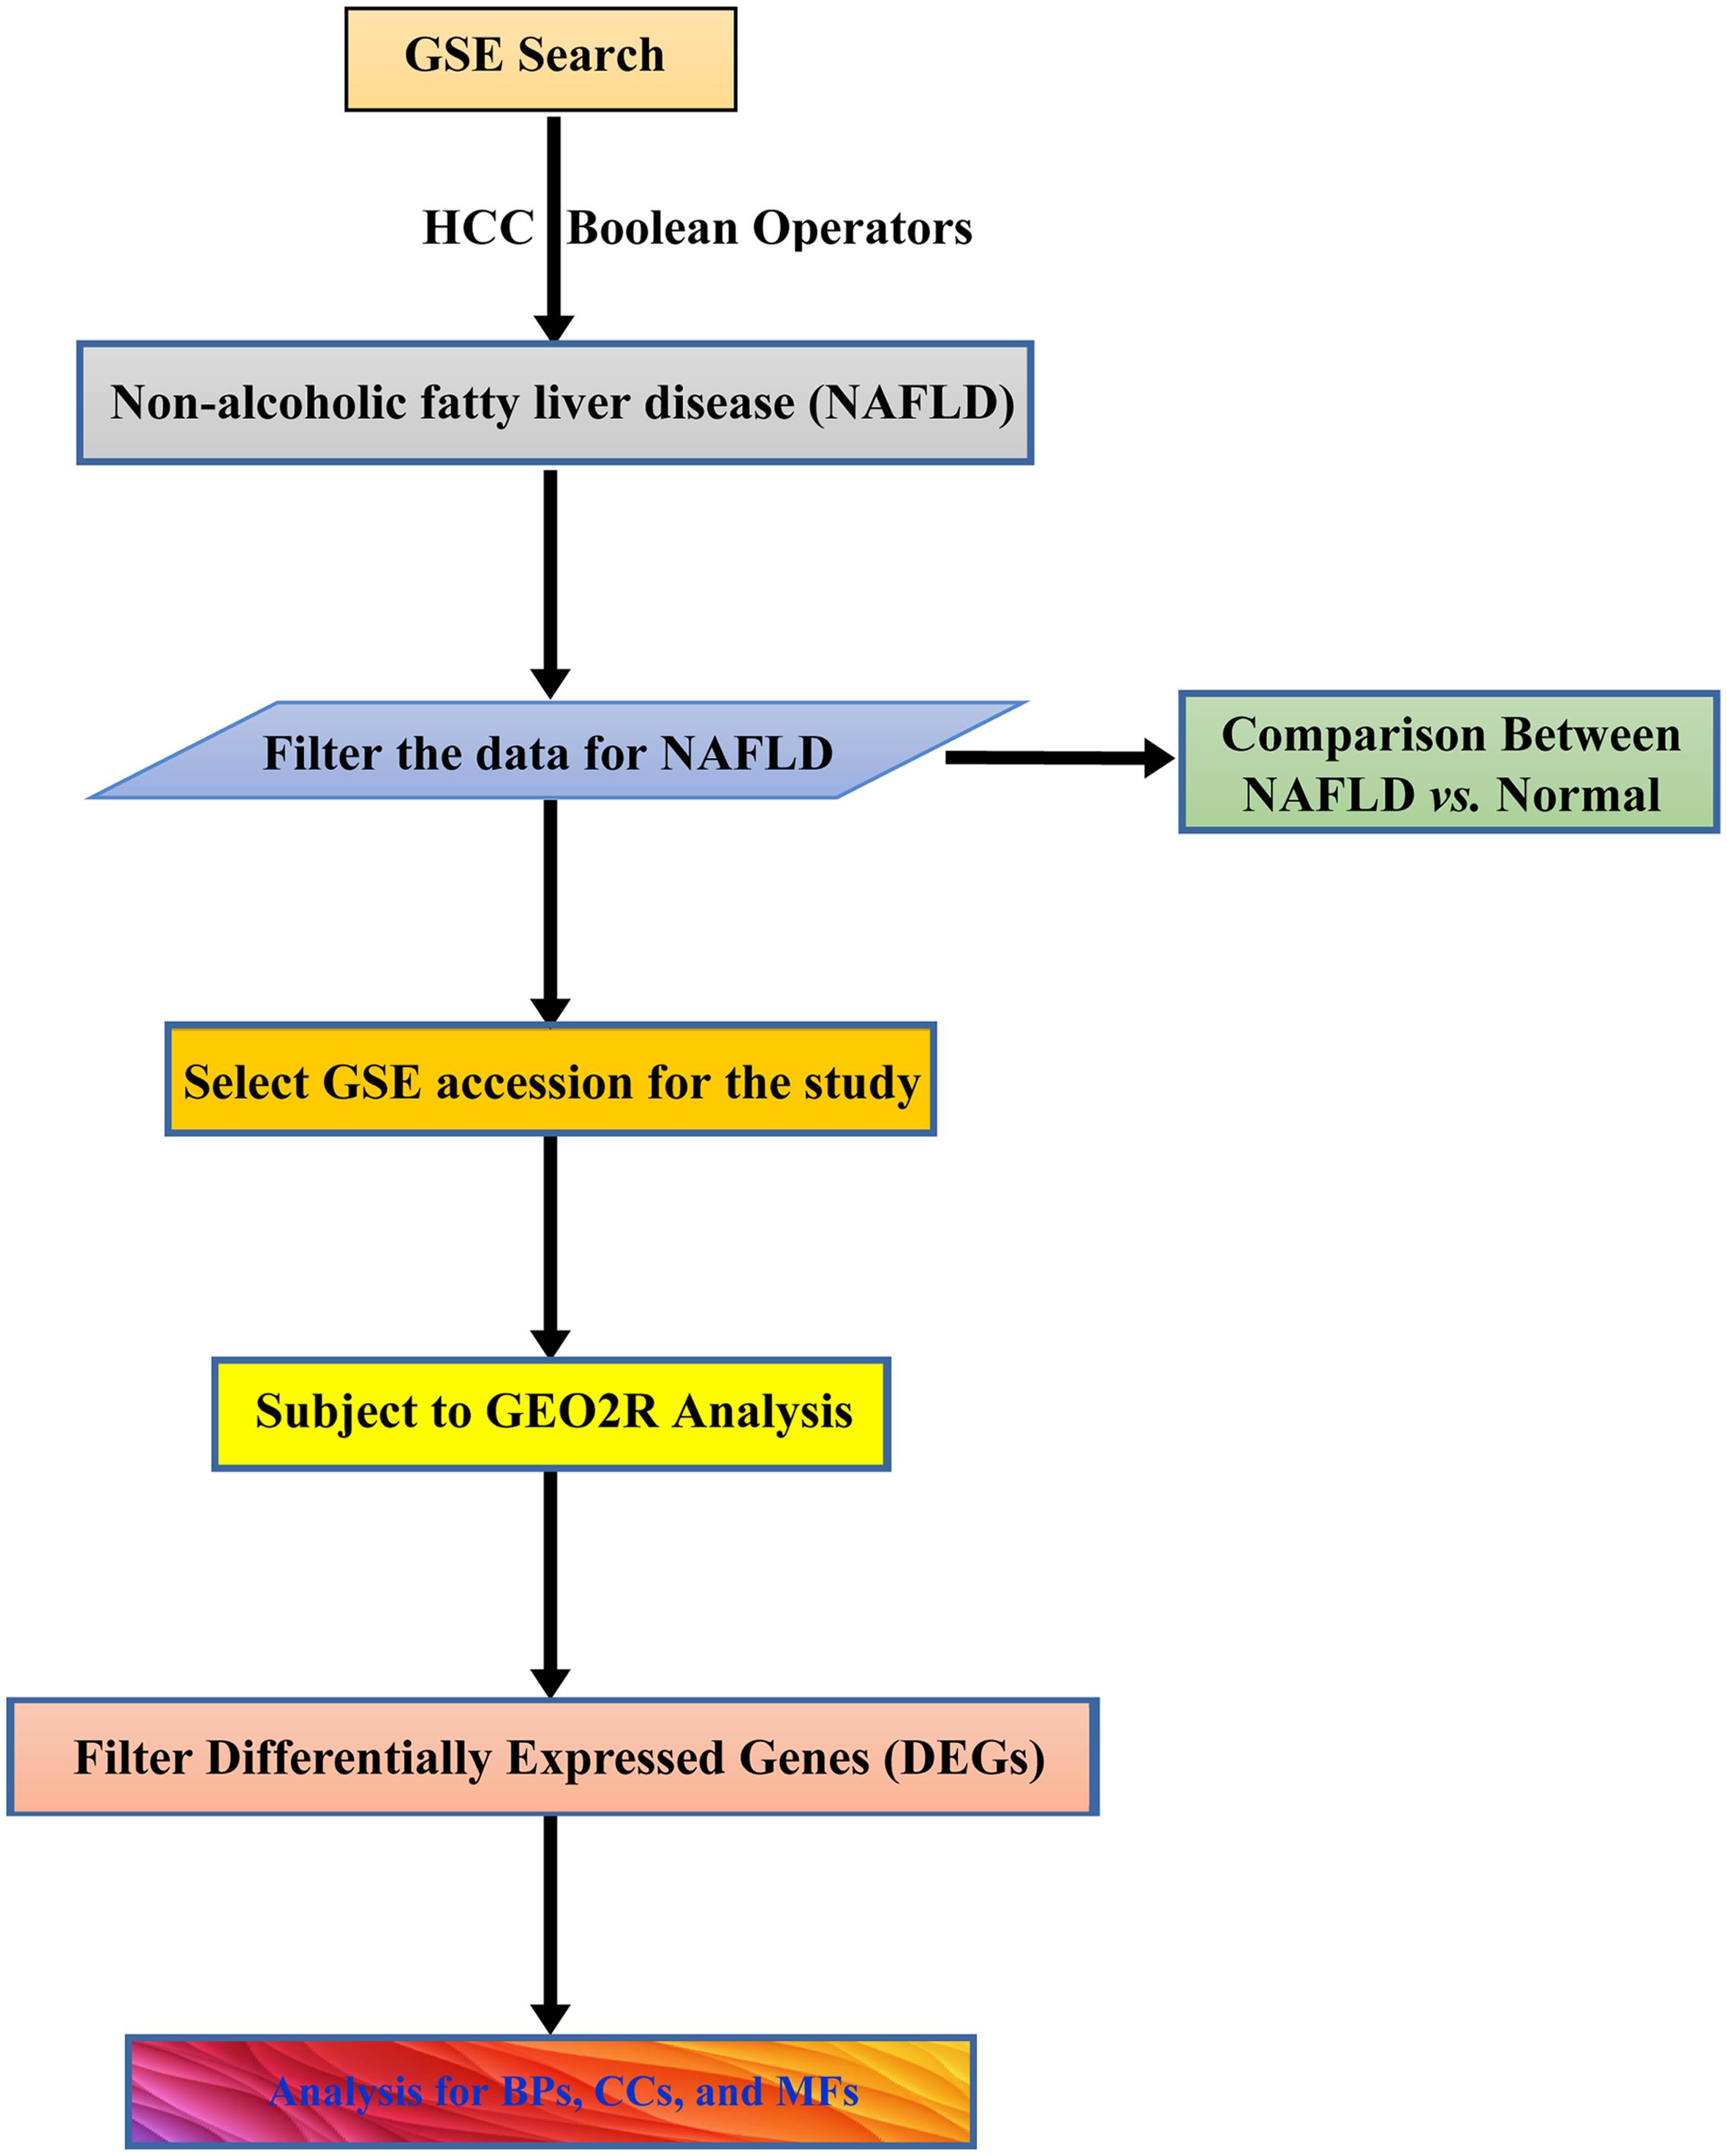 The workflow for the analysis of the microarray dataset using the GEO2R online program of NCBI.